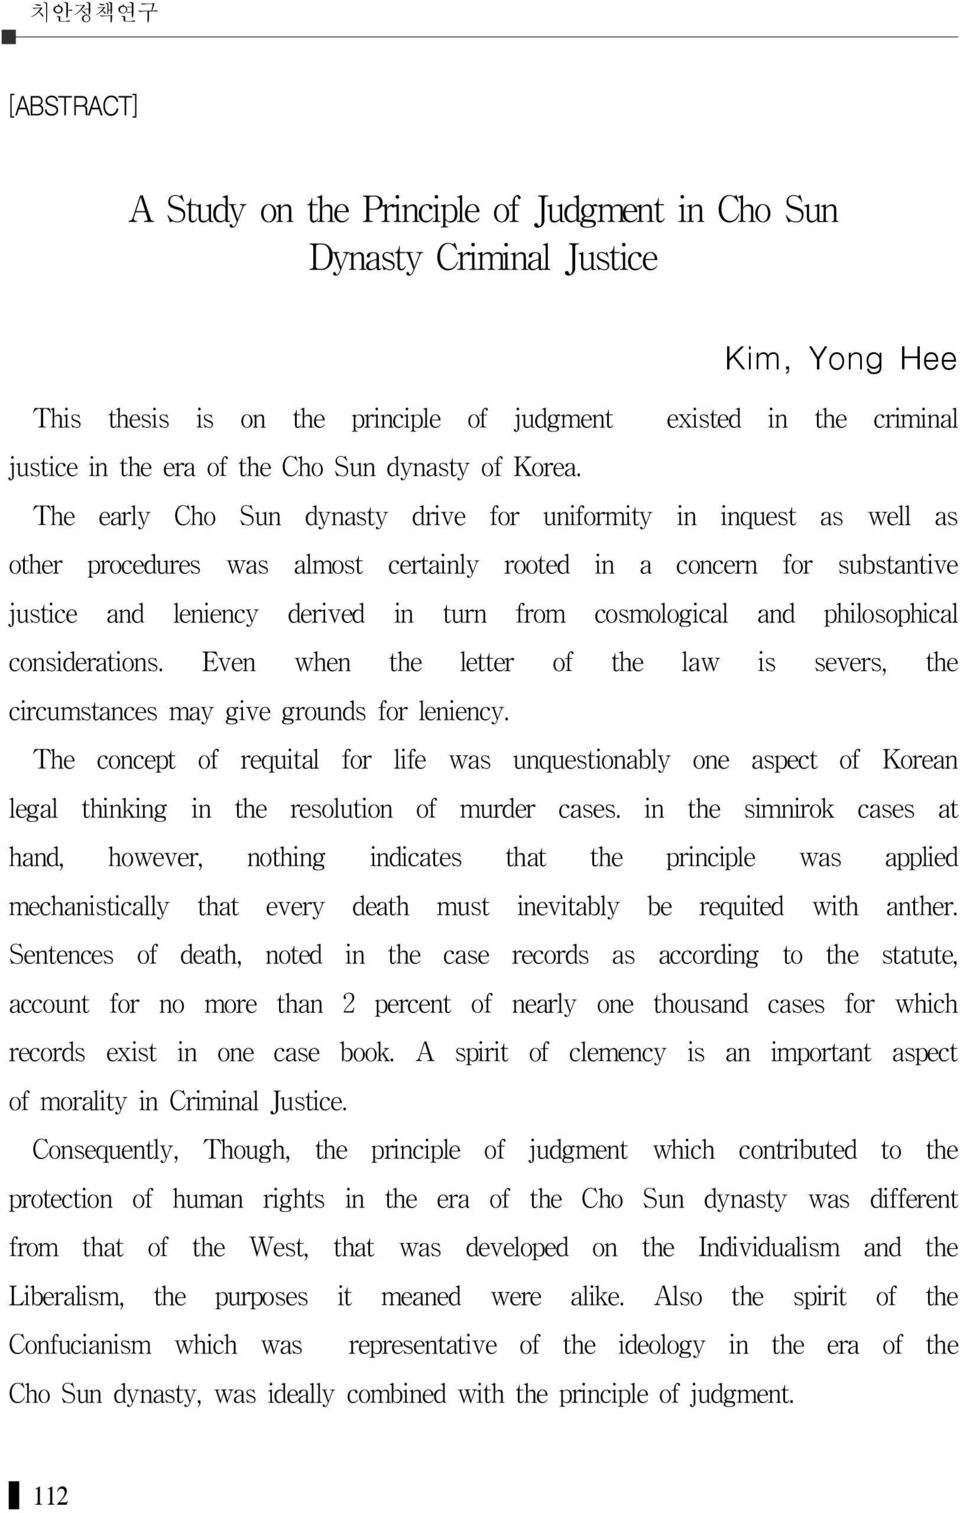 The early Cho Sun dynasty drive for uniformity in inquest as well as other procedures was almost certainly rooted in a concern for substantive justice and leniency derived in turn from cosmological